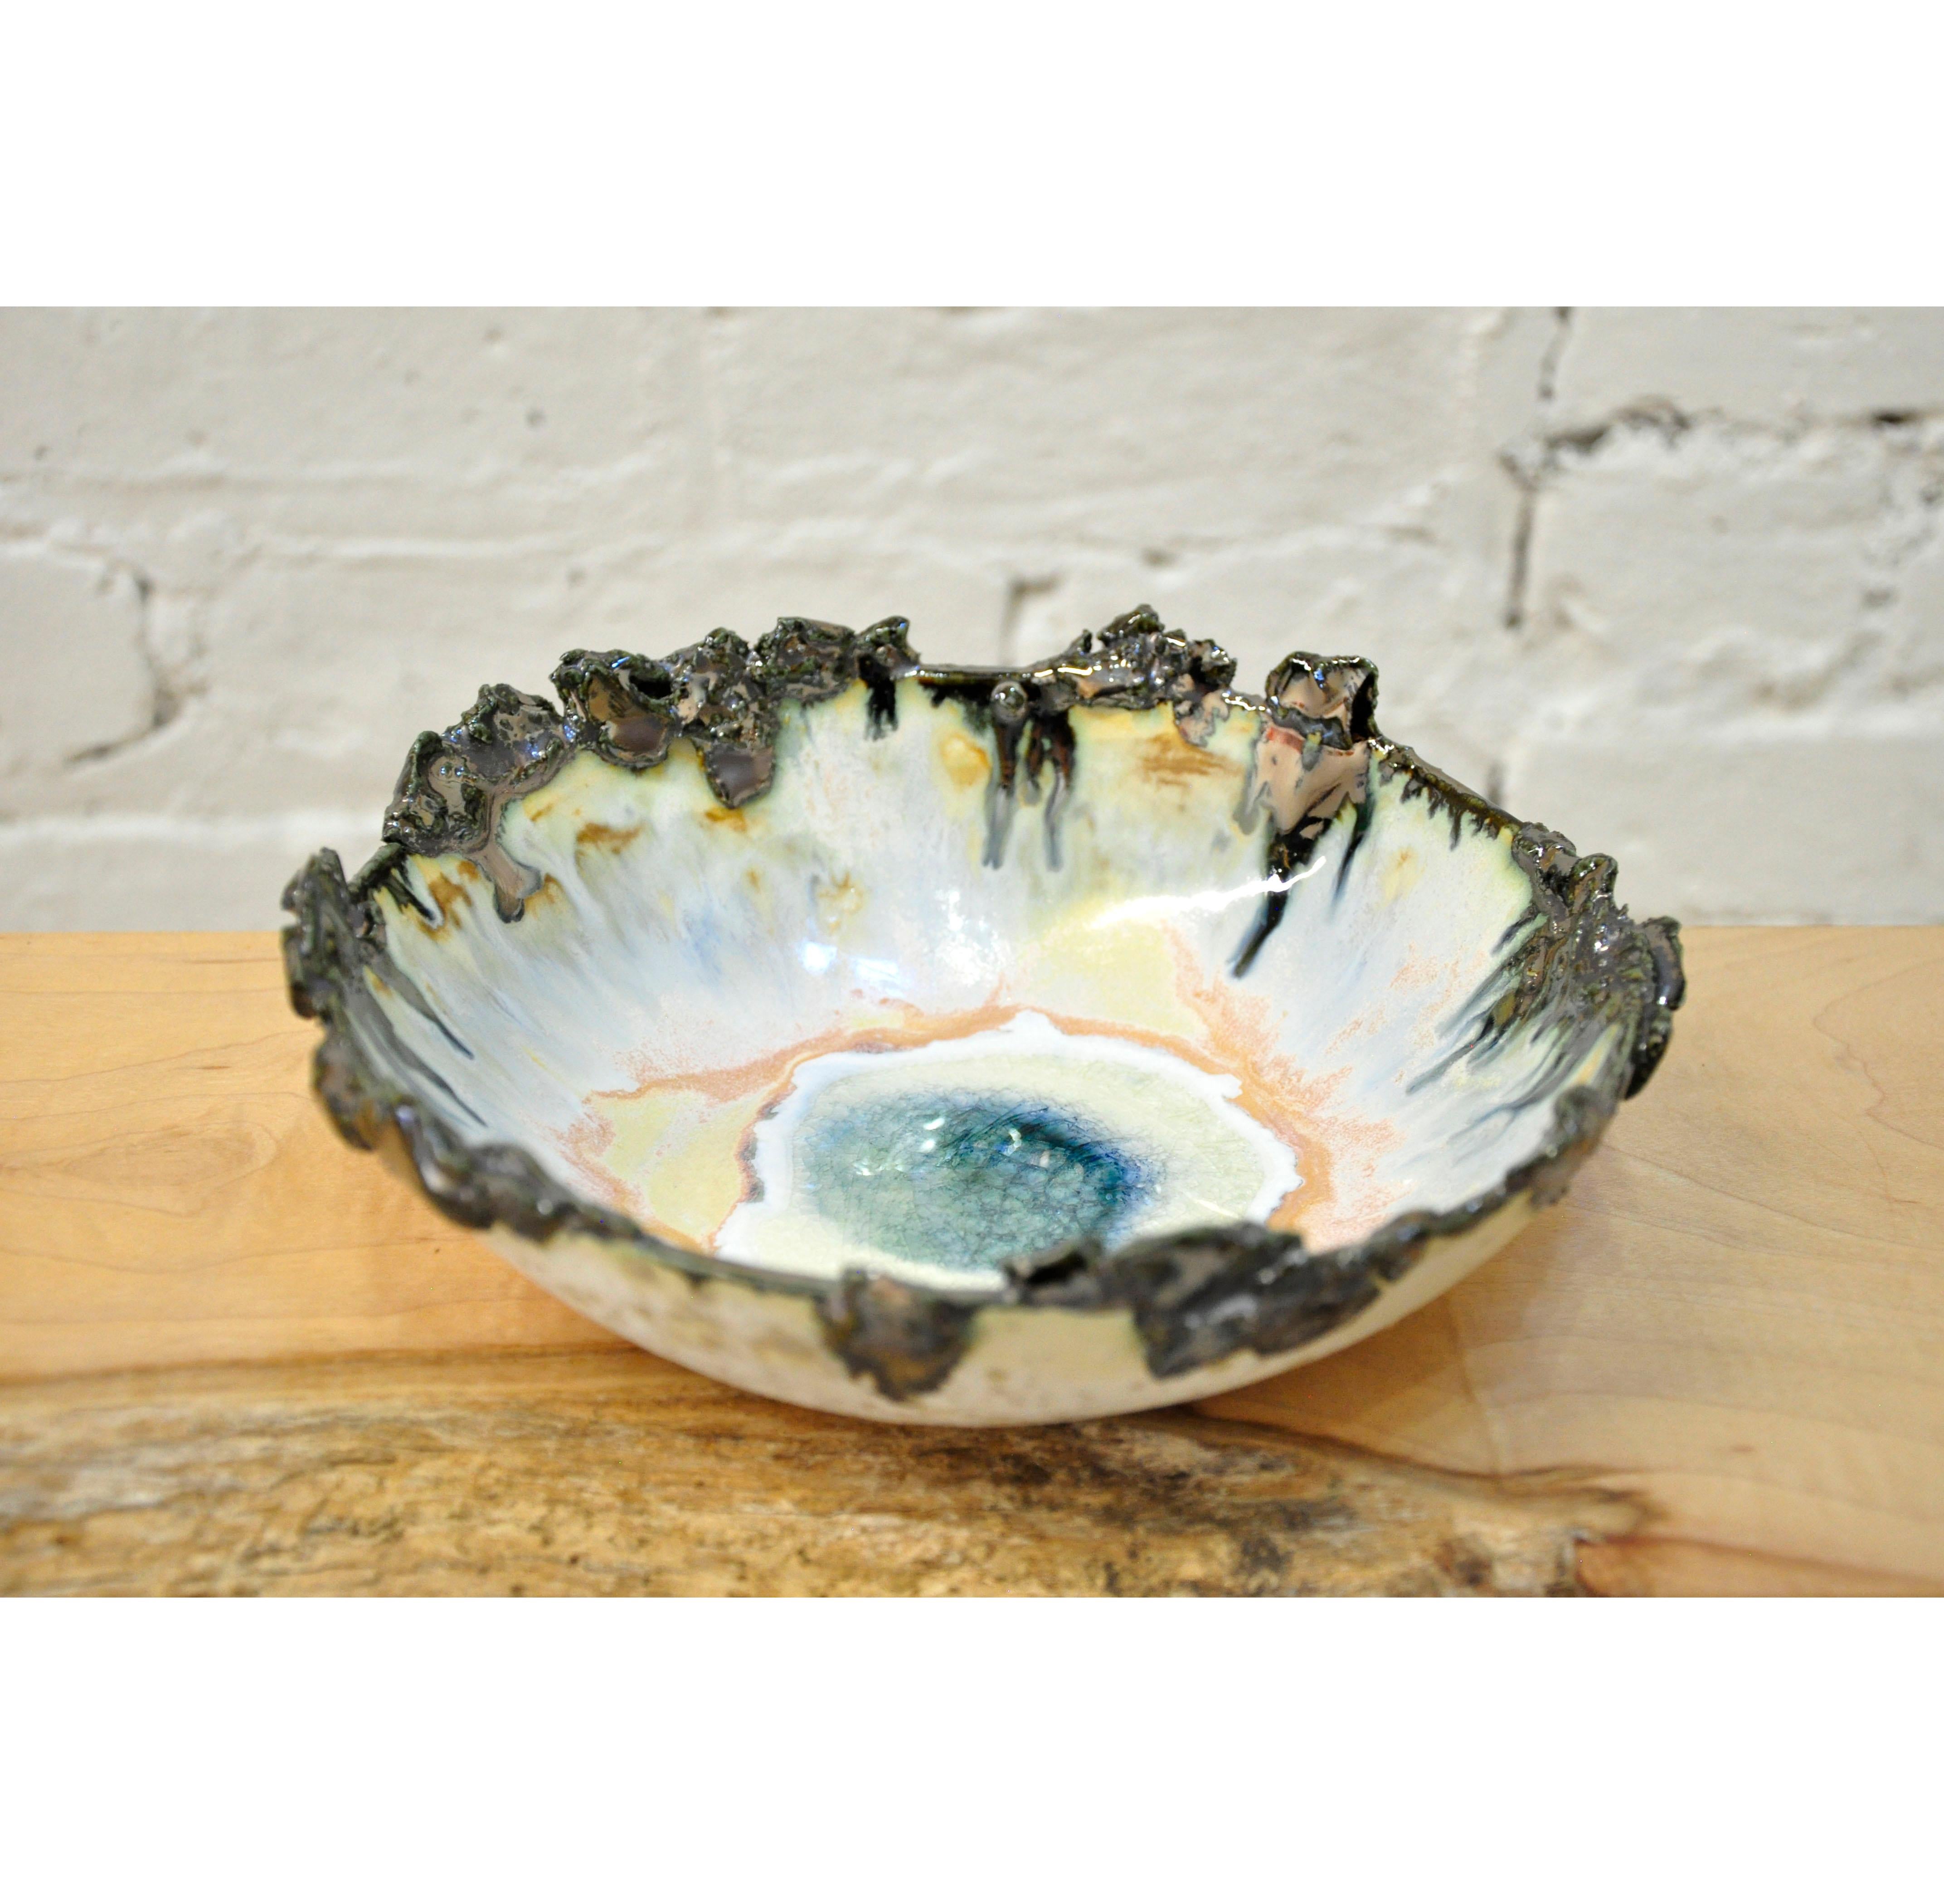 Iceland Bowl with Silver Crust by Minh Singer (Moderne)